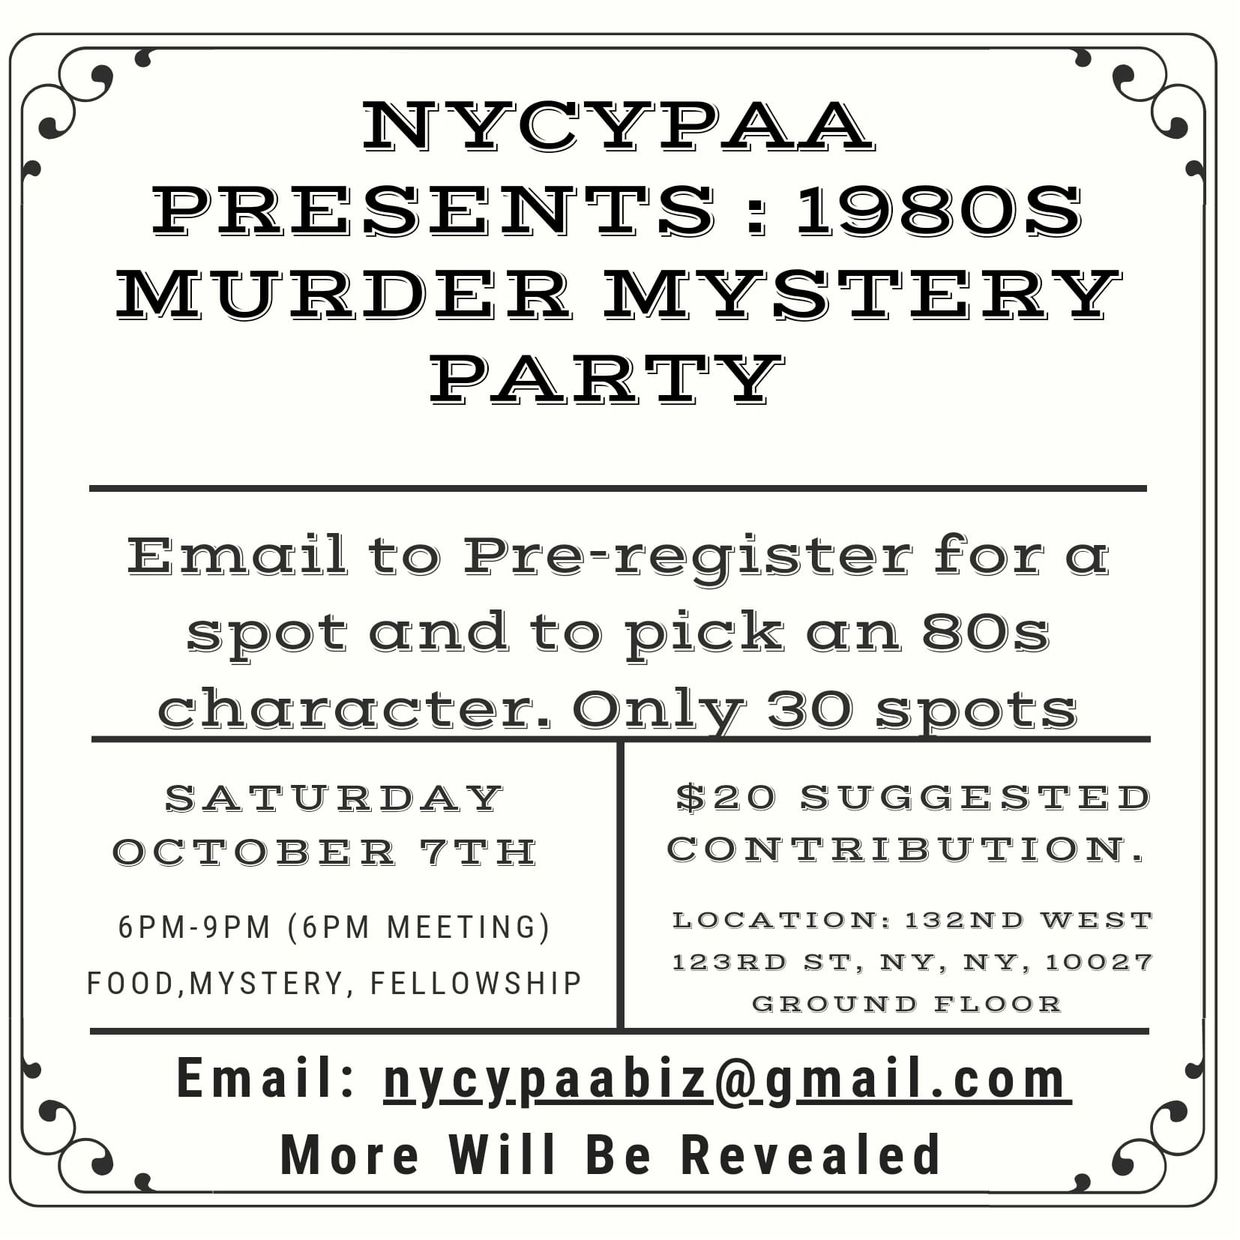 NYCYPAA Murder Mystery Party